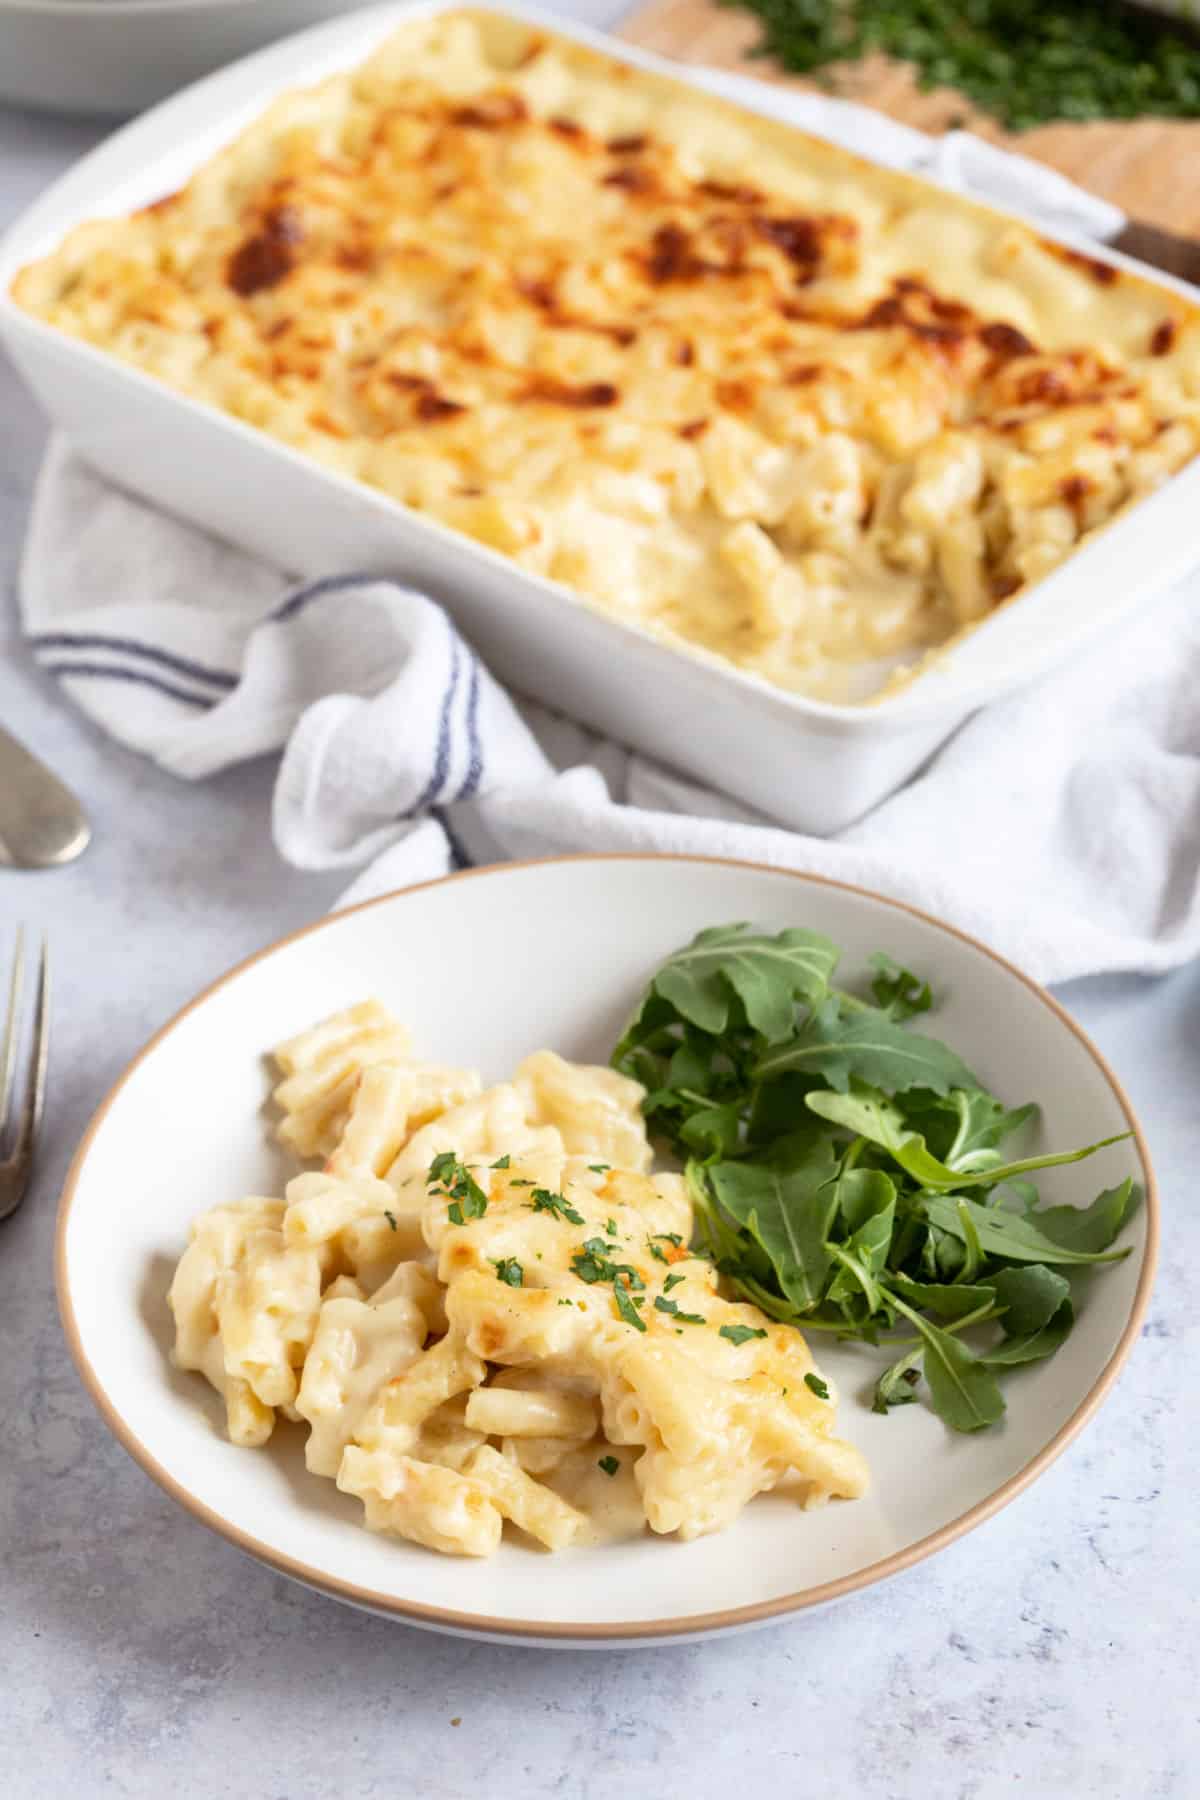 A plate of macaroni cheese with a green side salad.